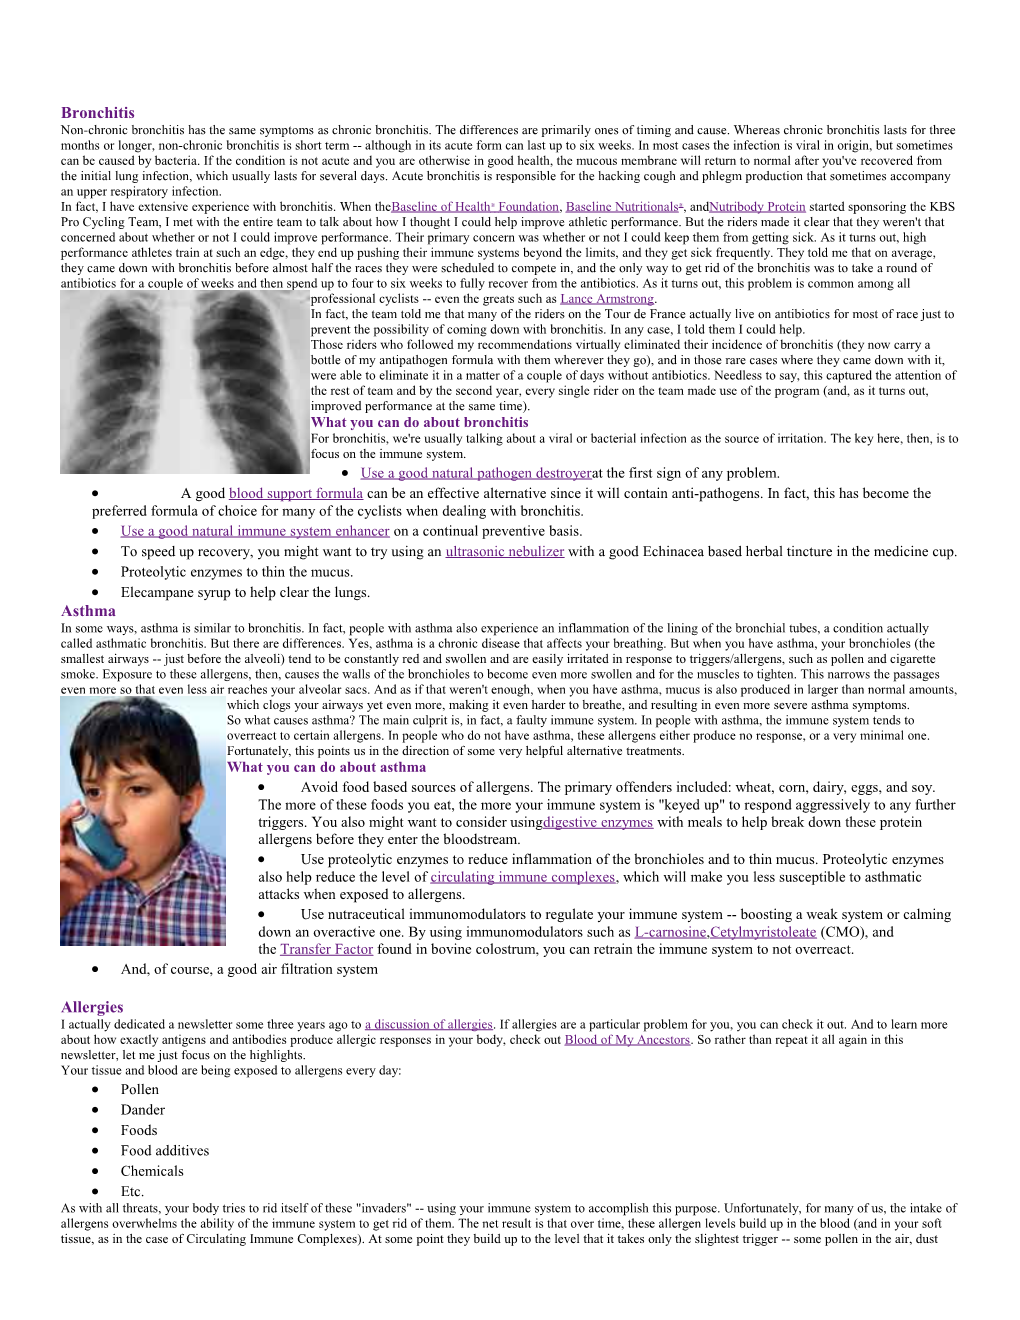 Instructions: Read the Information About Respiratory Diseases and Answer the Questions